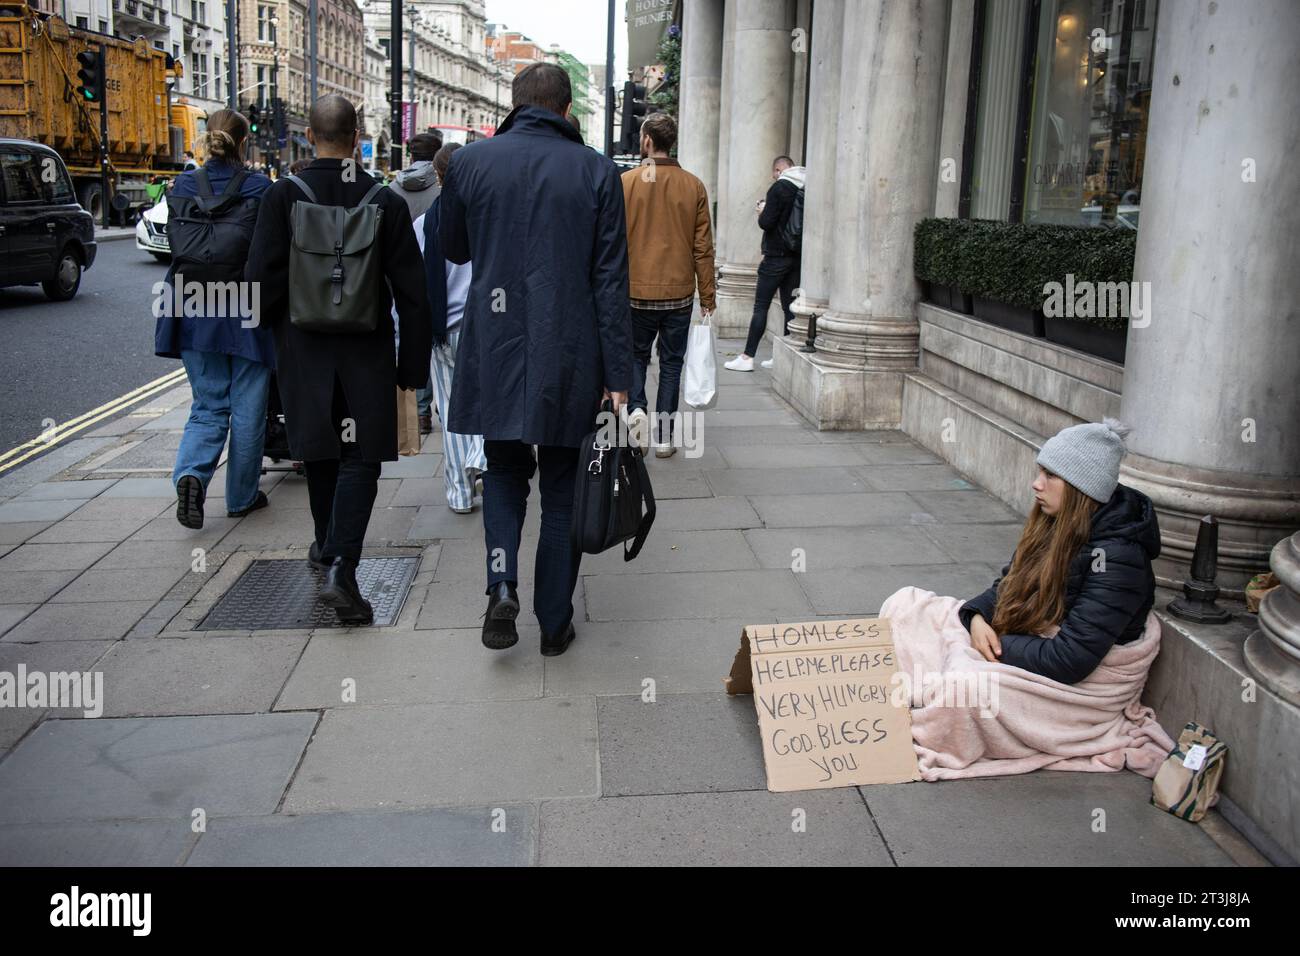 A homeless woman sits outside The Wolesley as businessmen walk past, Piccadilly, London, England, UK Stock Photo